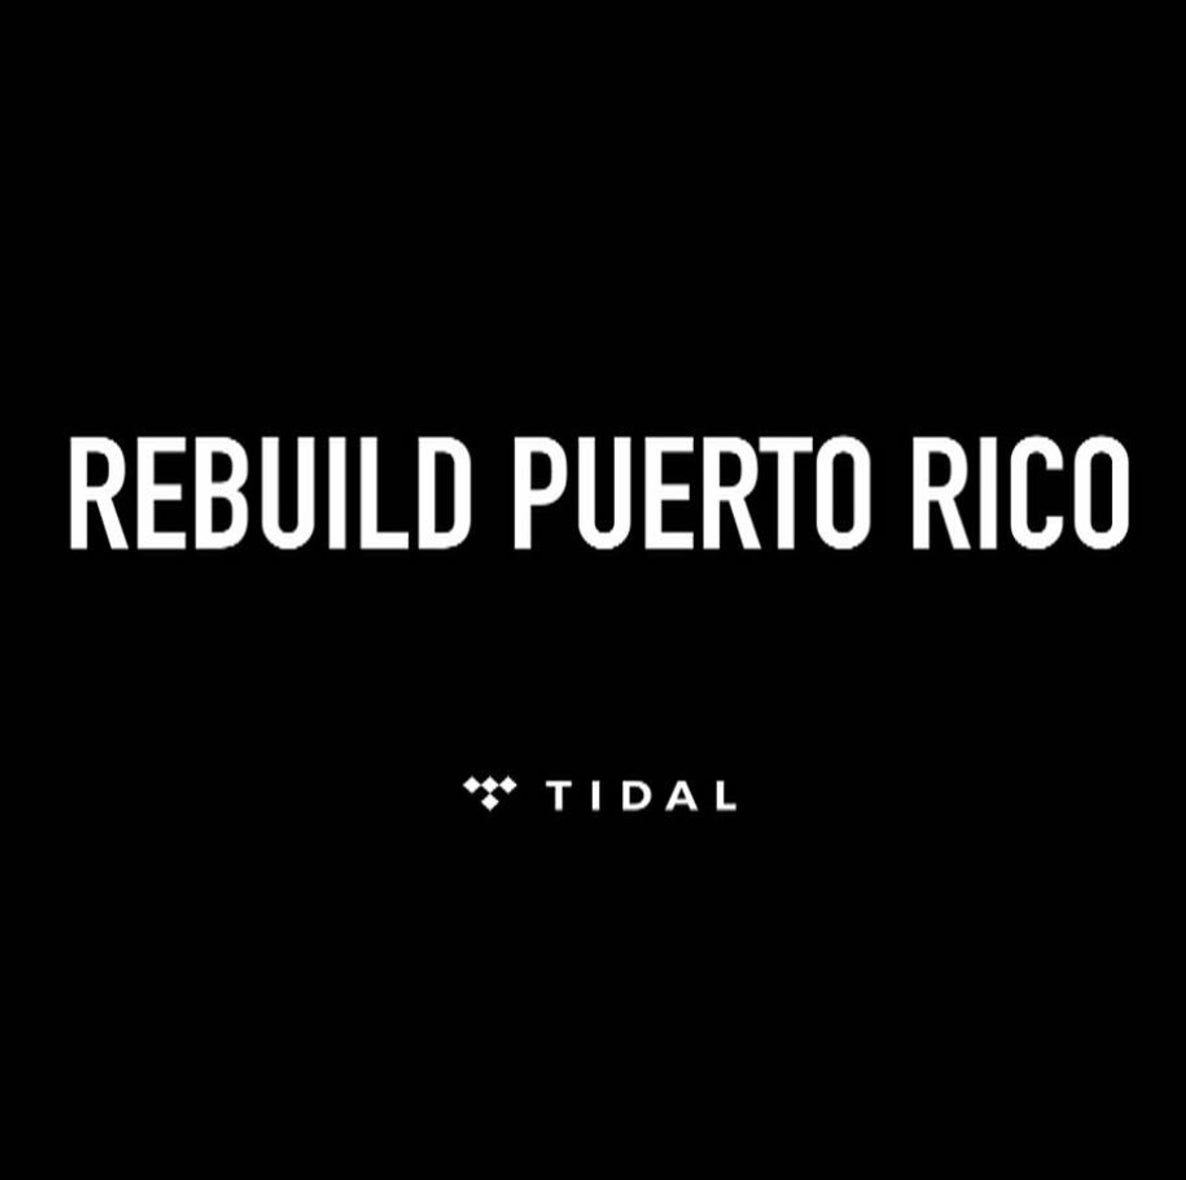 TIDAL Is Sending 200,000 Pounds Of Much-Needed Supplies To The People Of Puerto Rico
